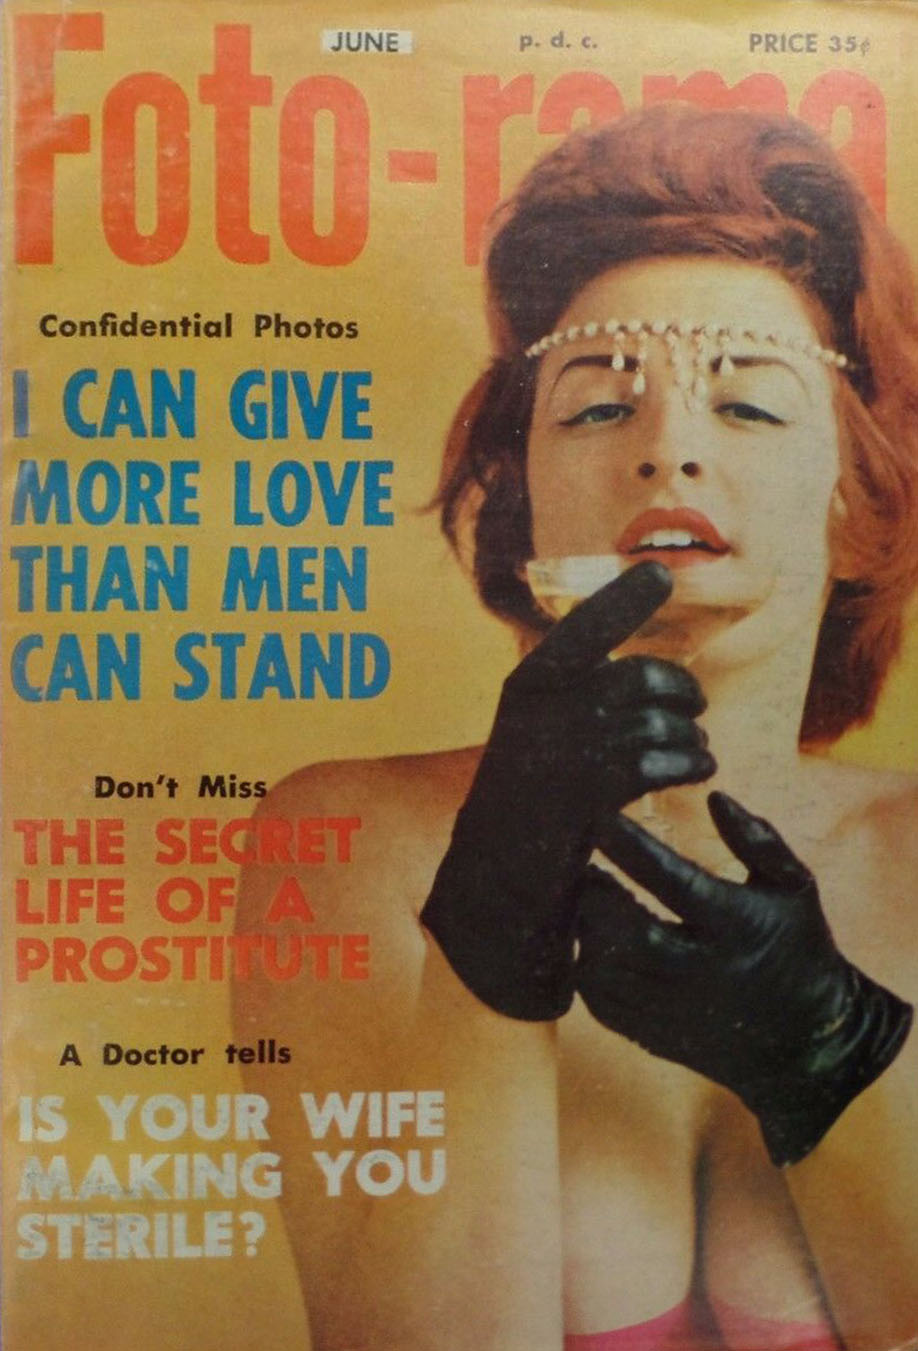 Foto-rama June 1963, , Confidential Photos I Can Give More Love Than Men Can Stand